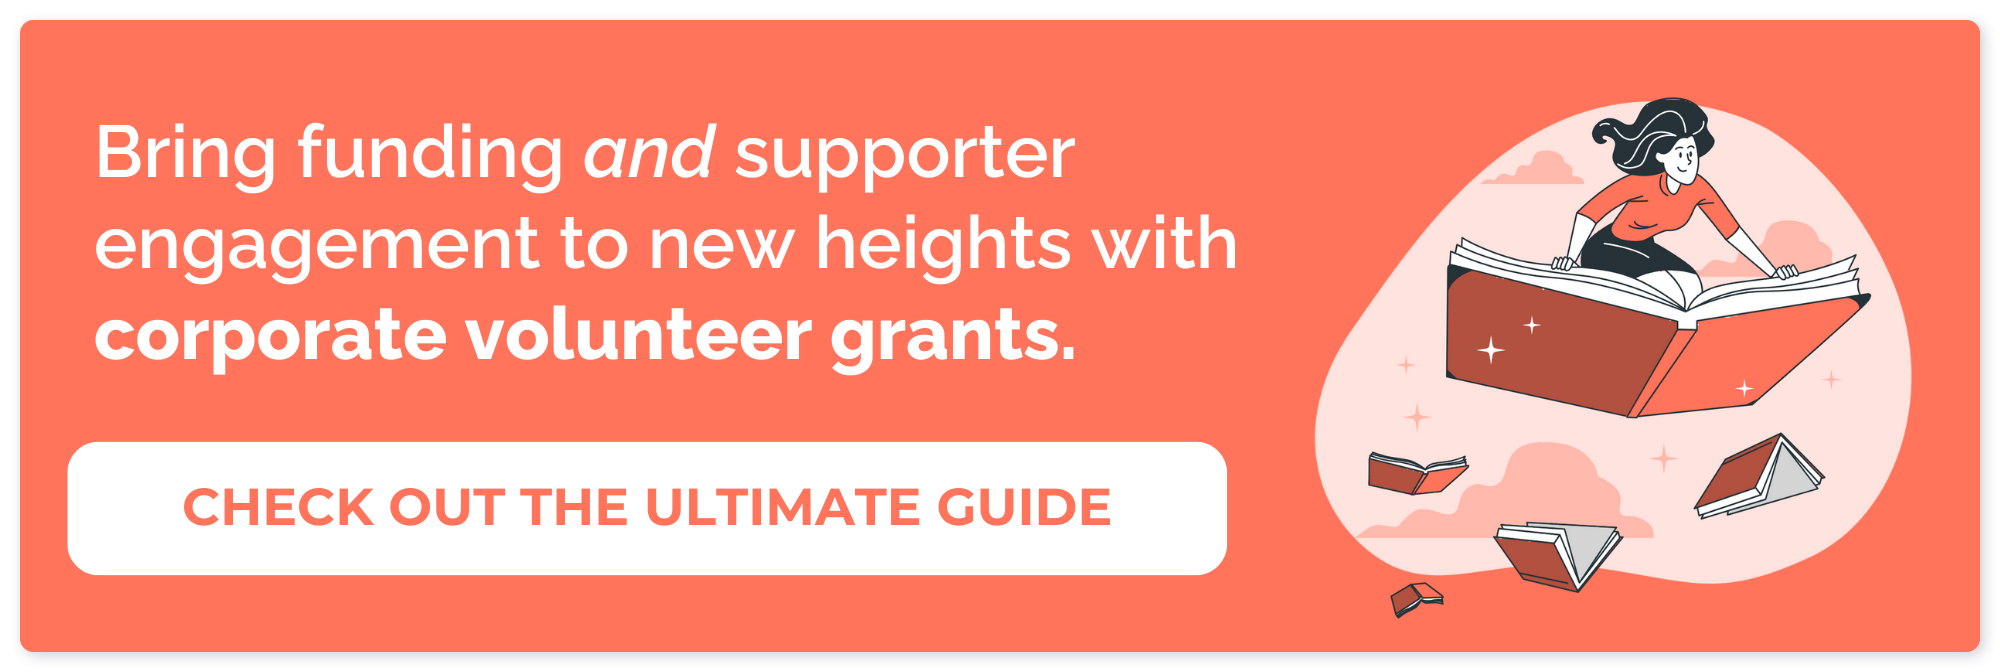 Bring supporter engagement and funding to new heights with volunteer grants - get the guide.